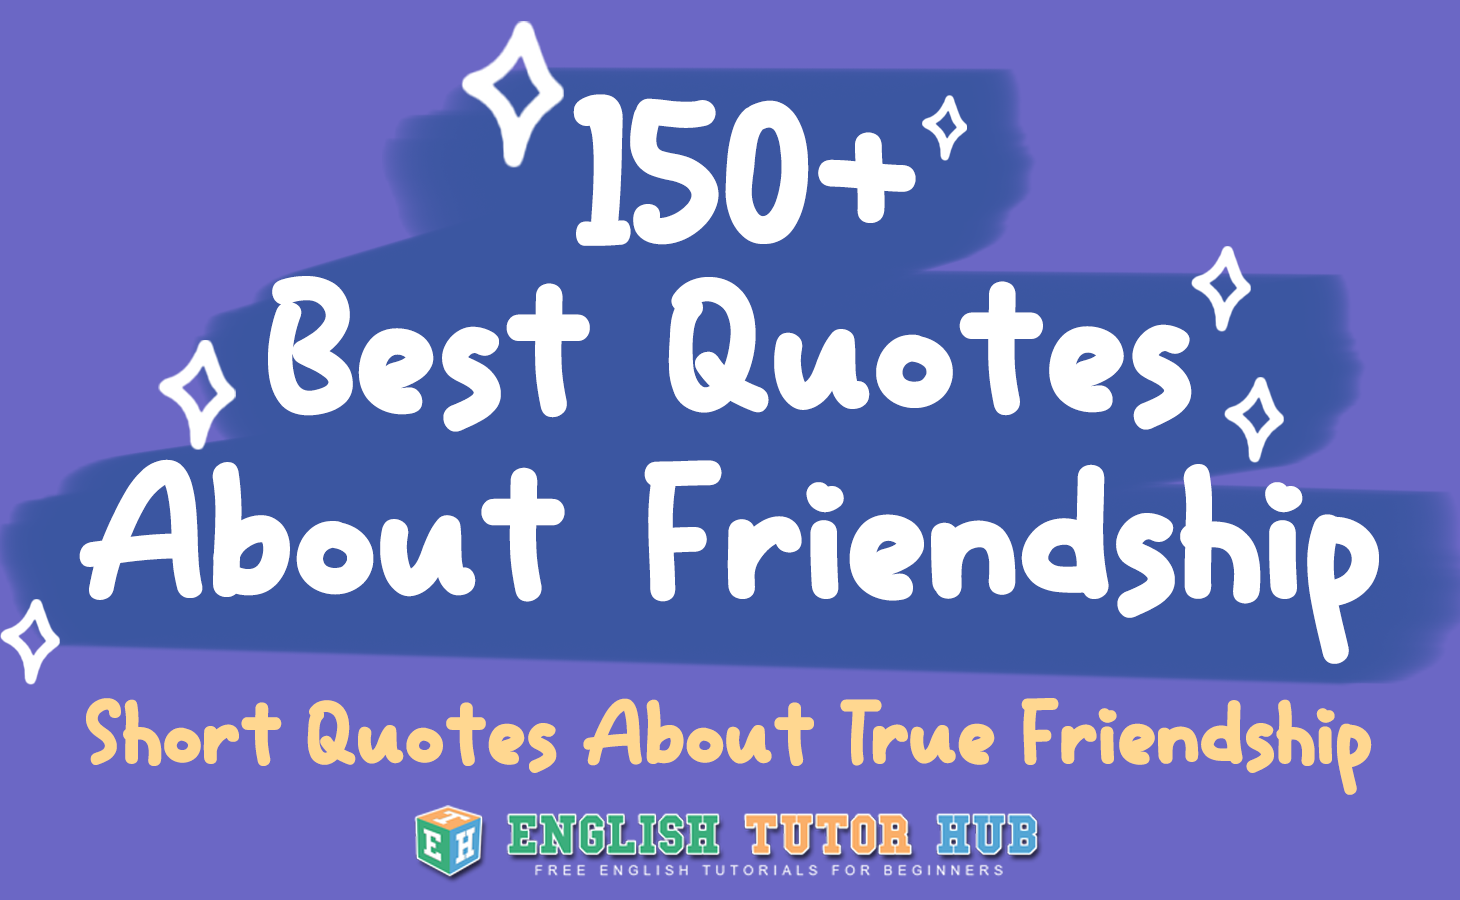 150+ Best Quotes About Friendship - Short Quotes About True Friendship